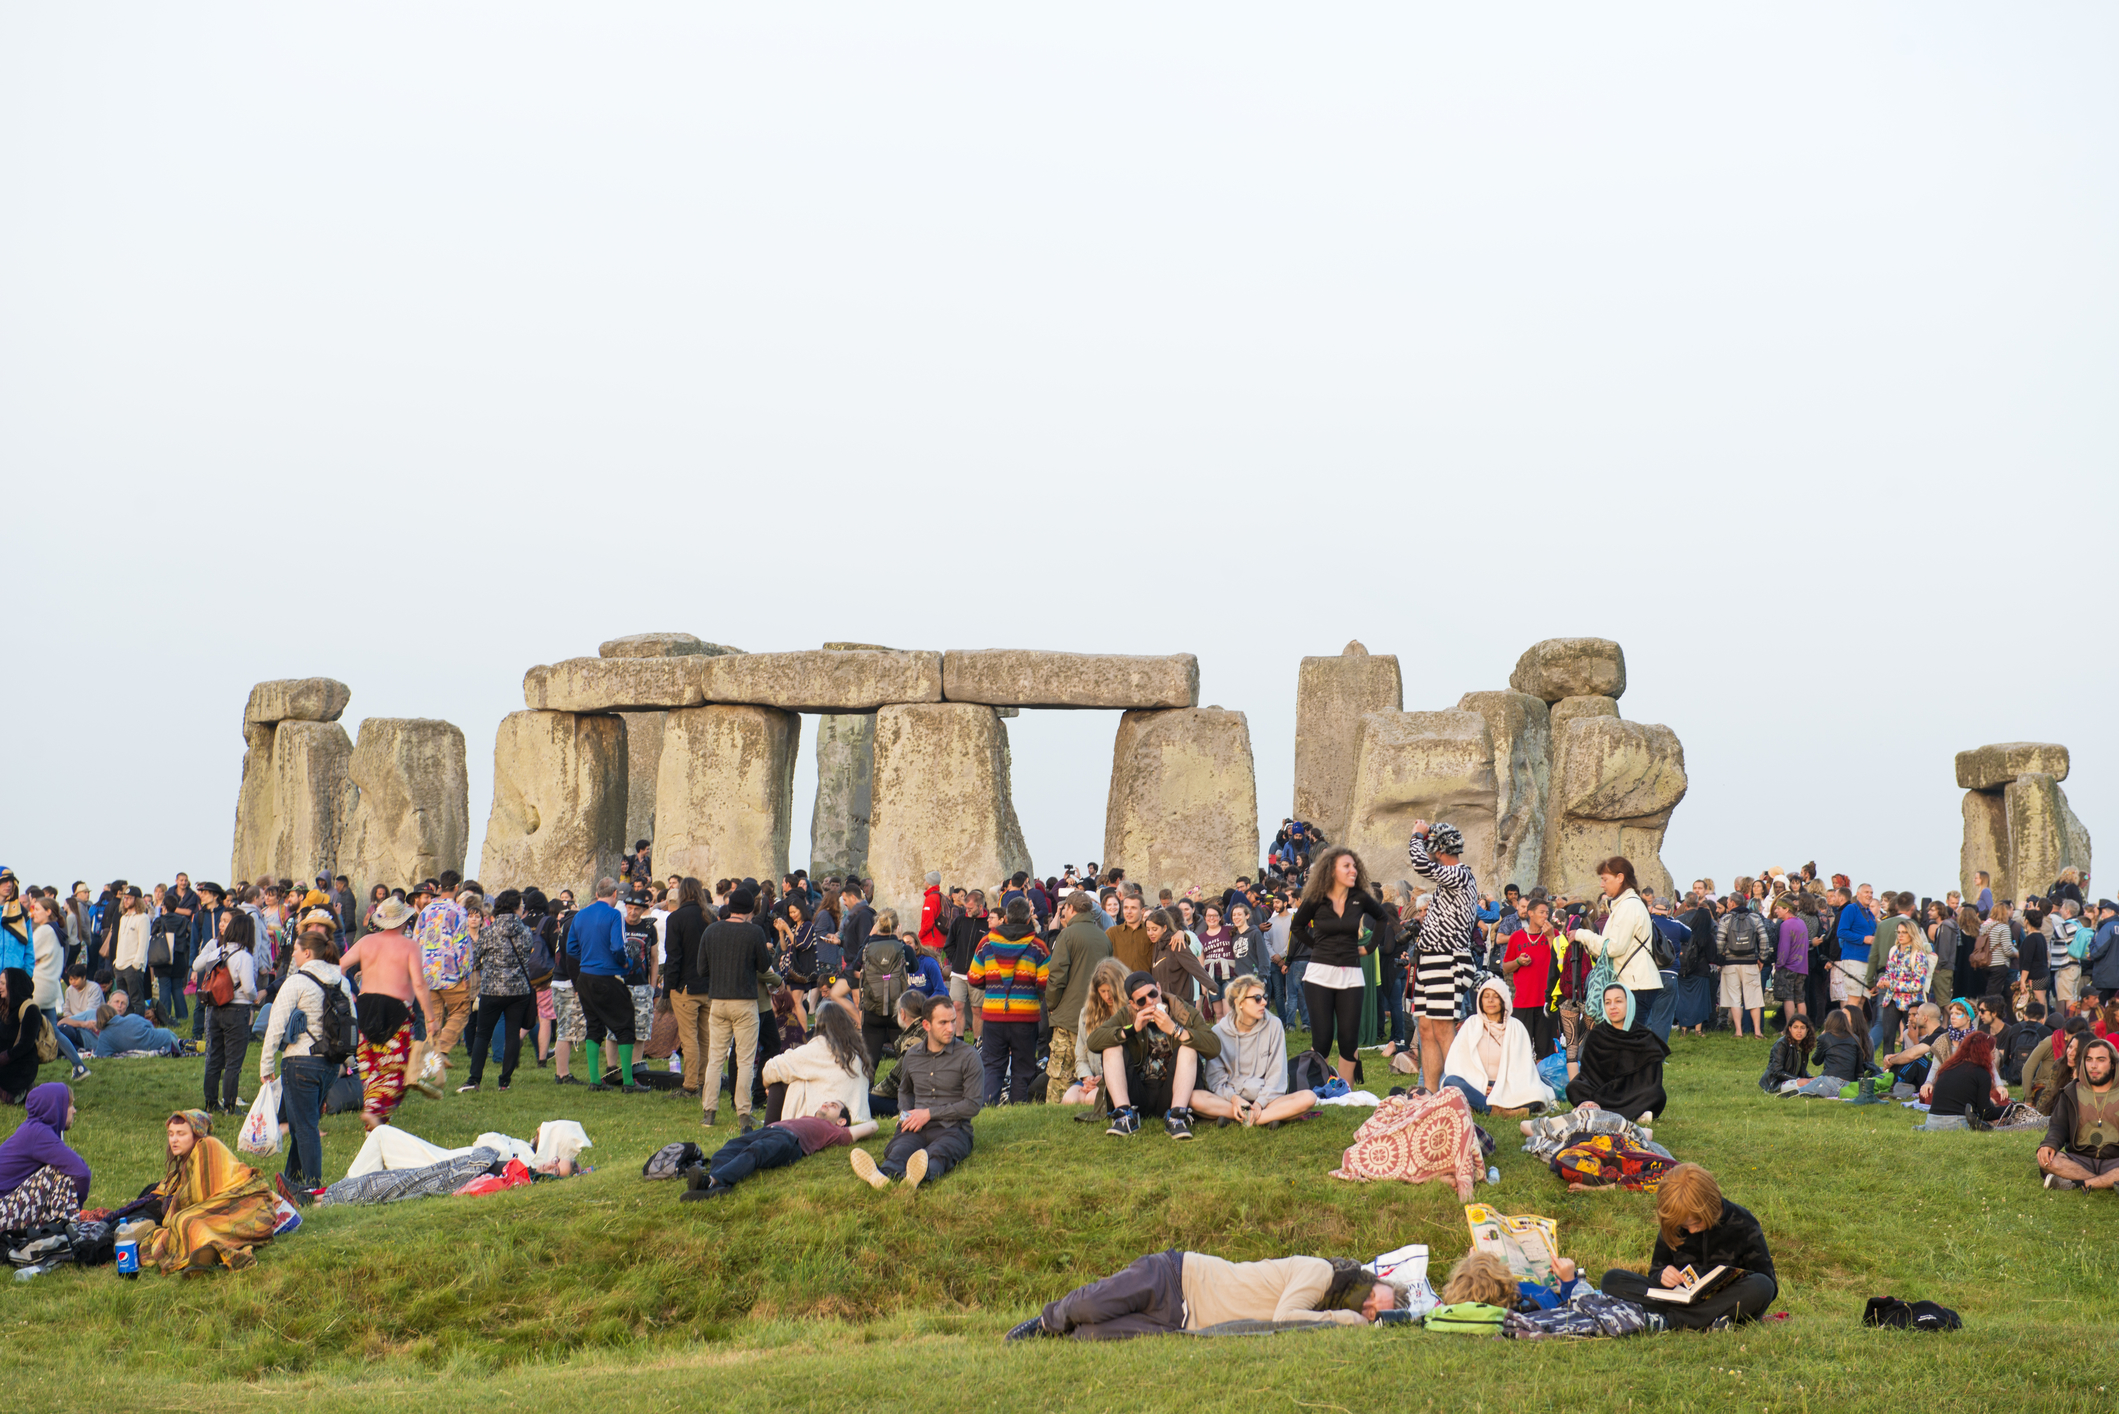 A view of the standing stones at Stonehenge with summer solstice celebration